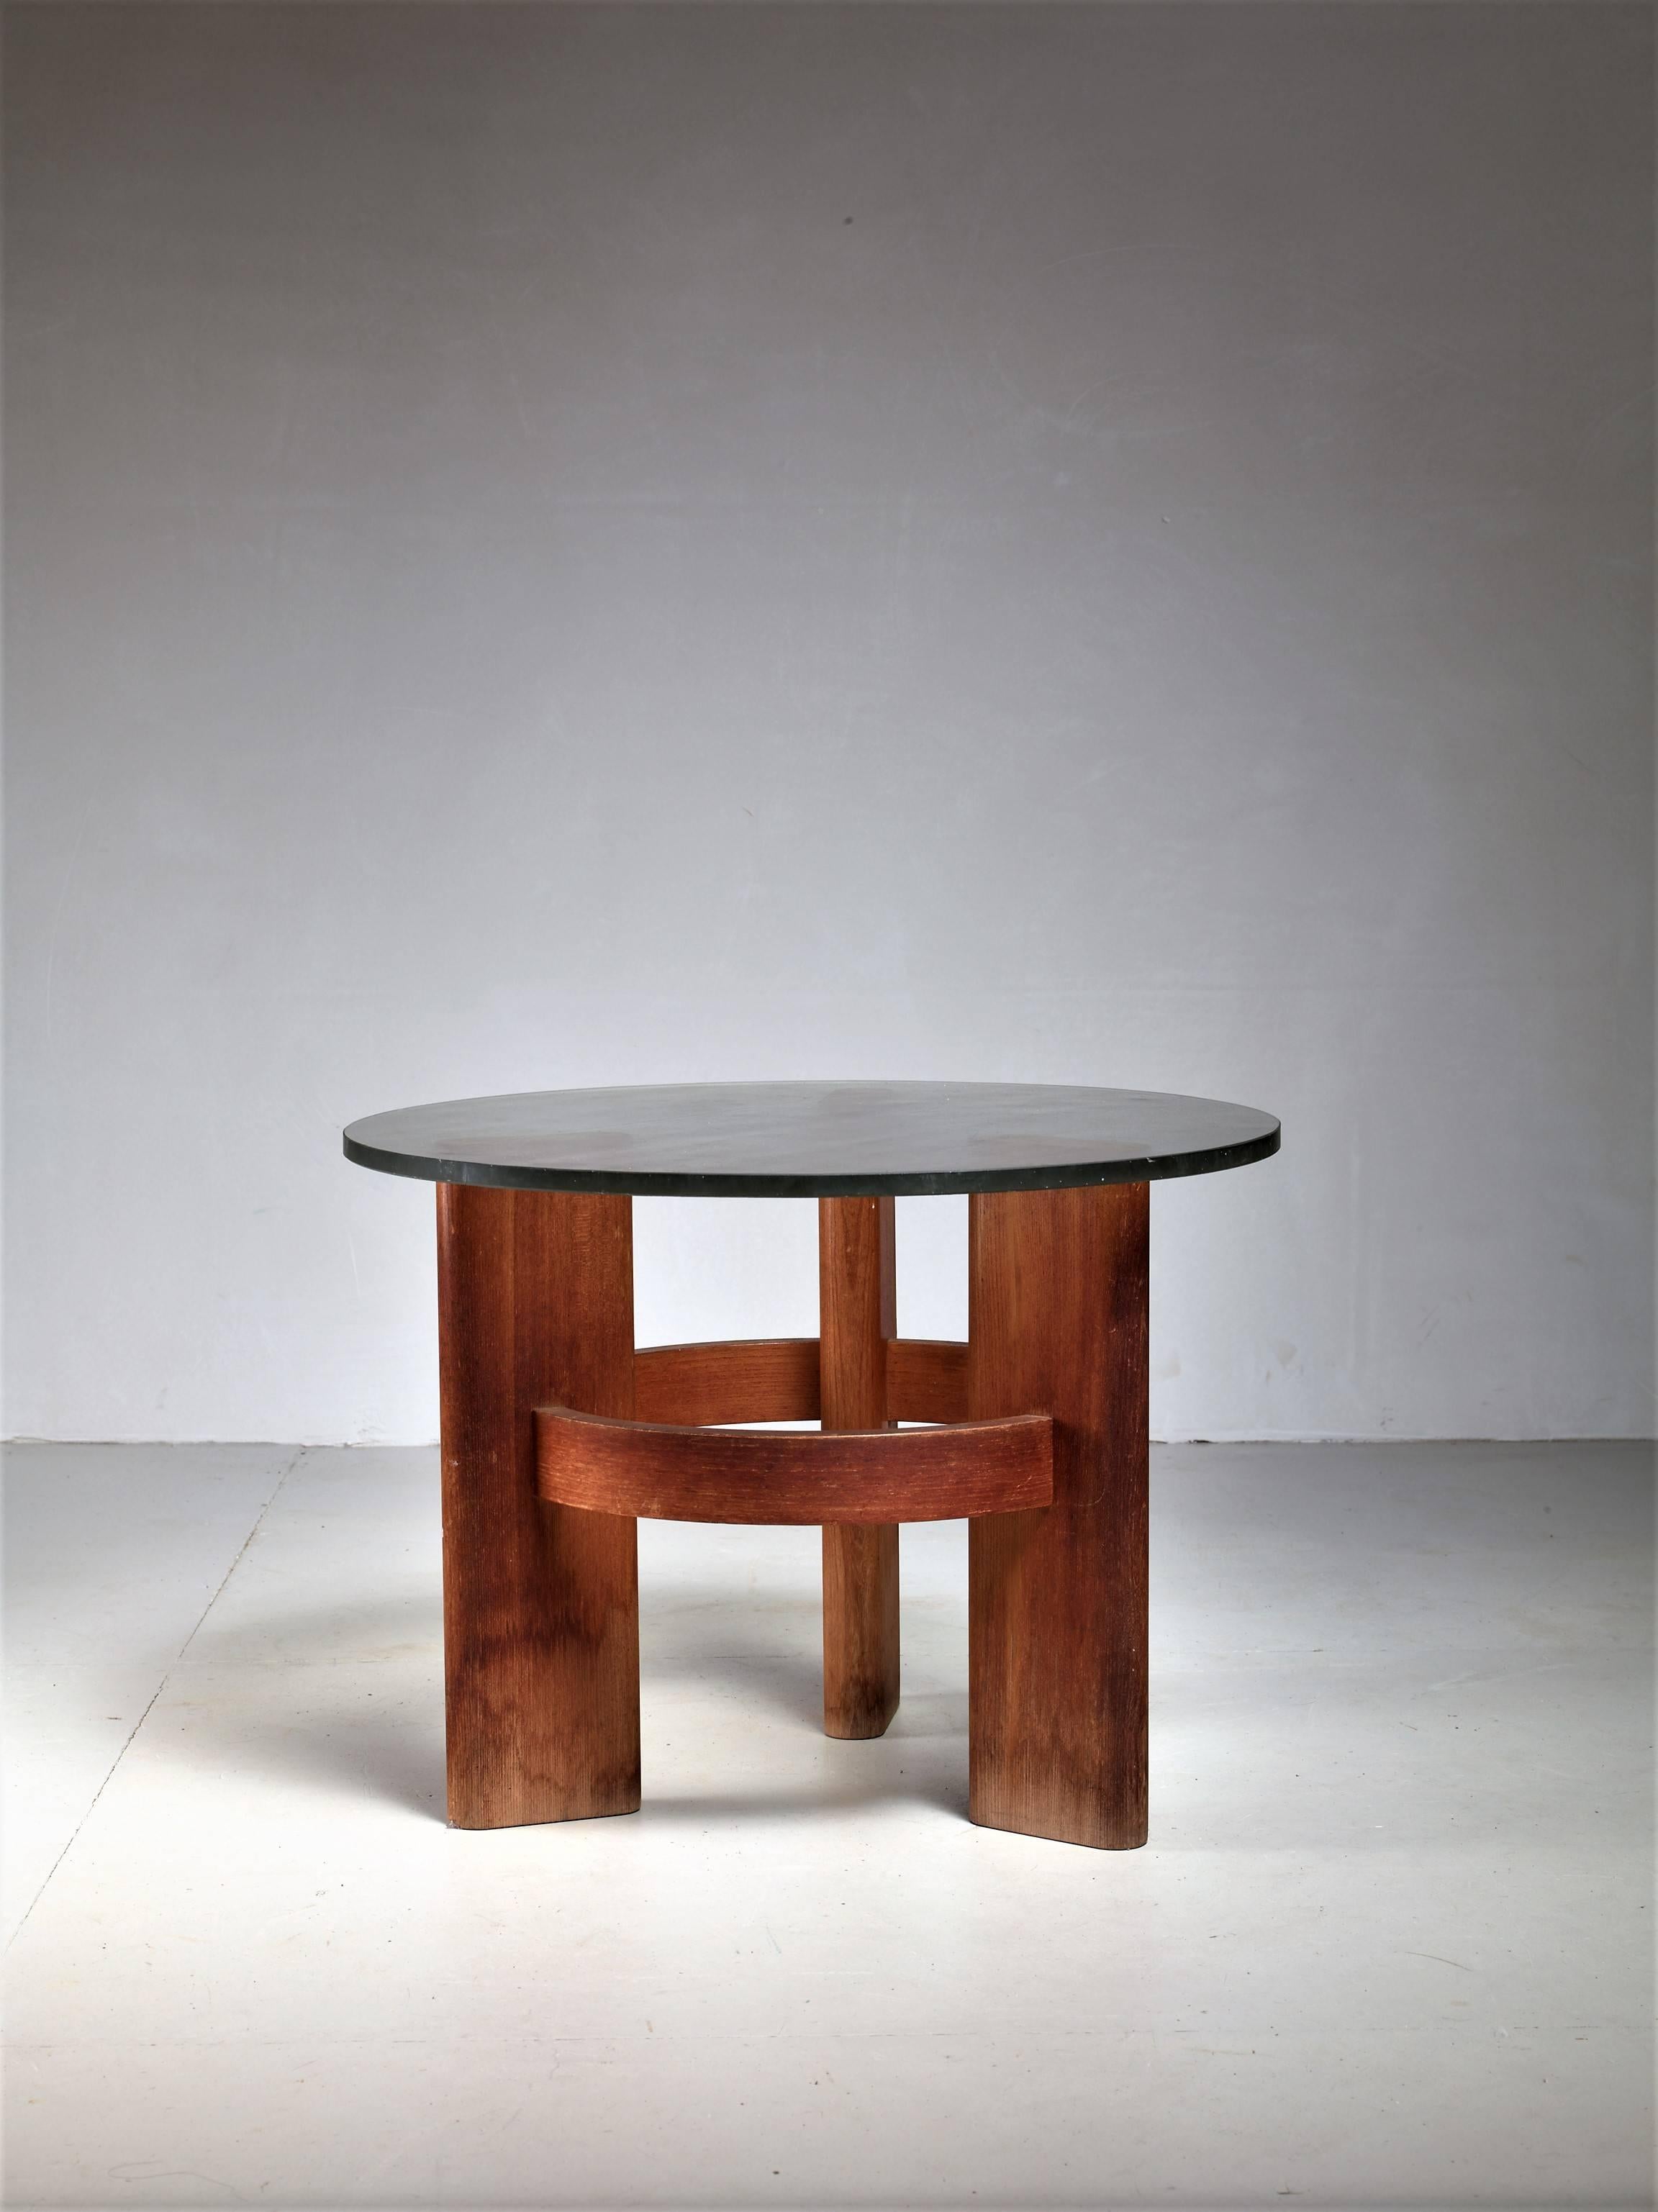 Scandinavian Modern Round Studio Side Table with Solid Old Oak Legs and Original Glass Top, Sweden